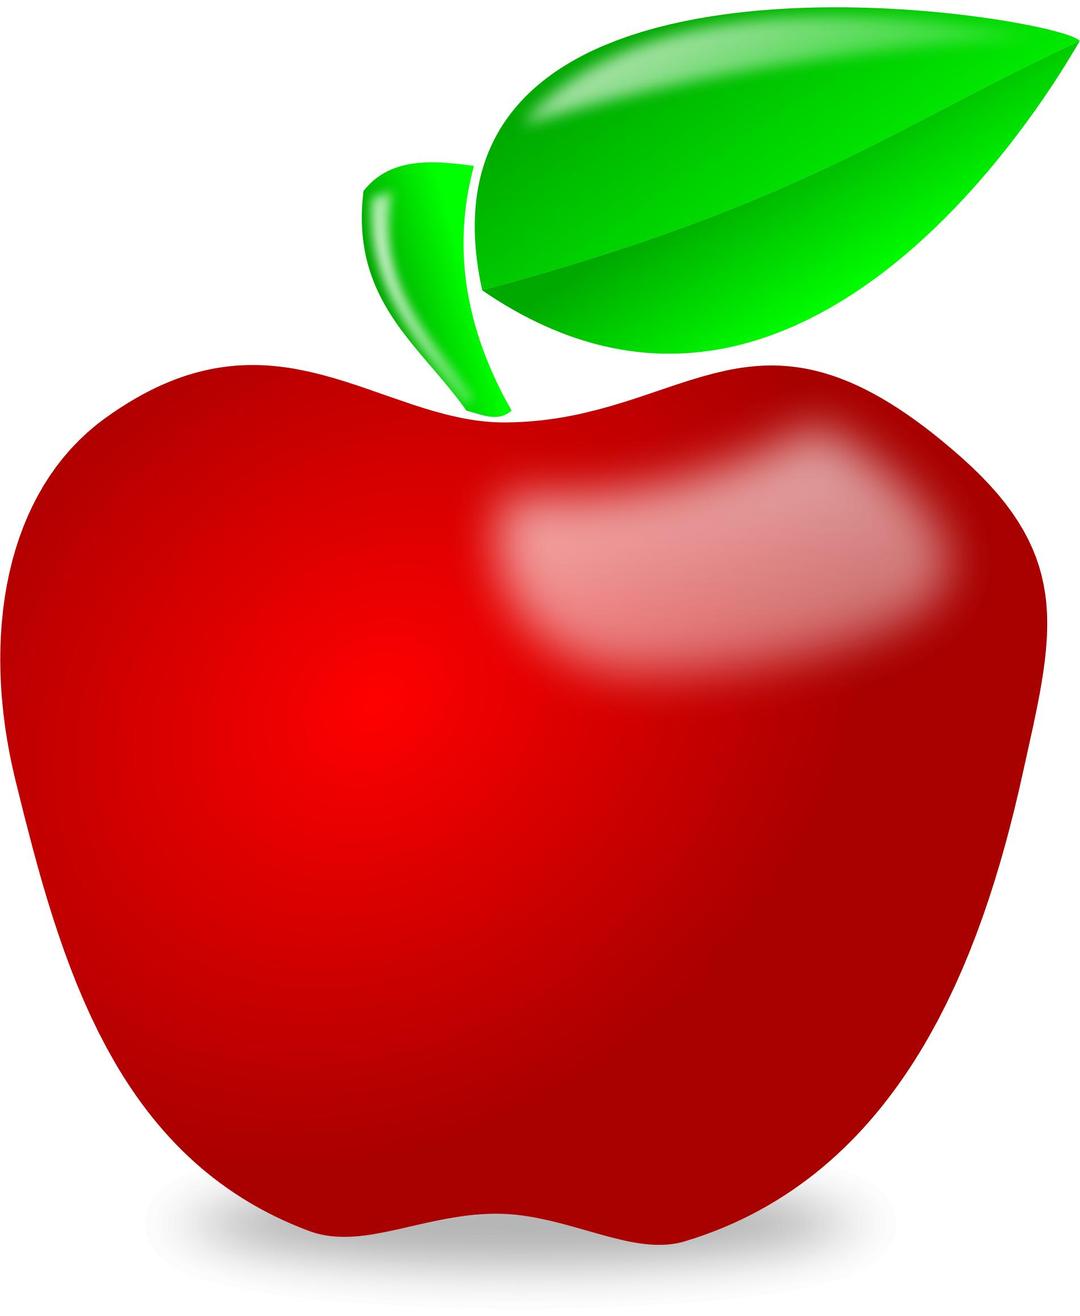 Glossy apple png transparent